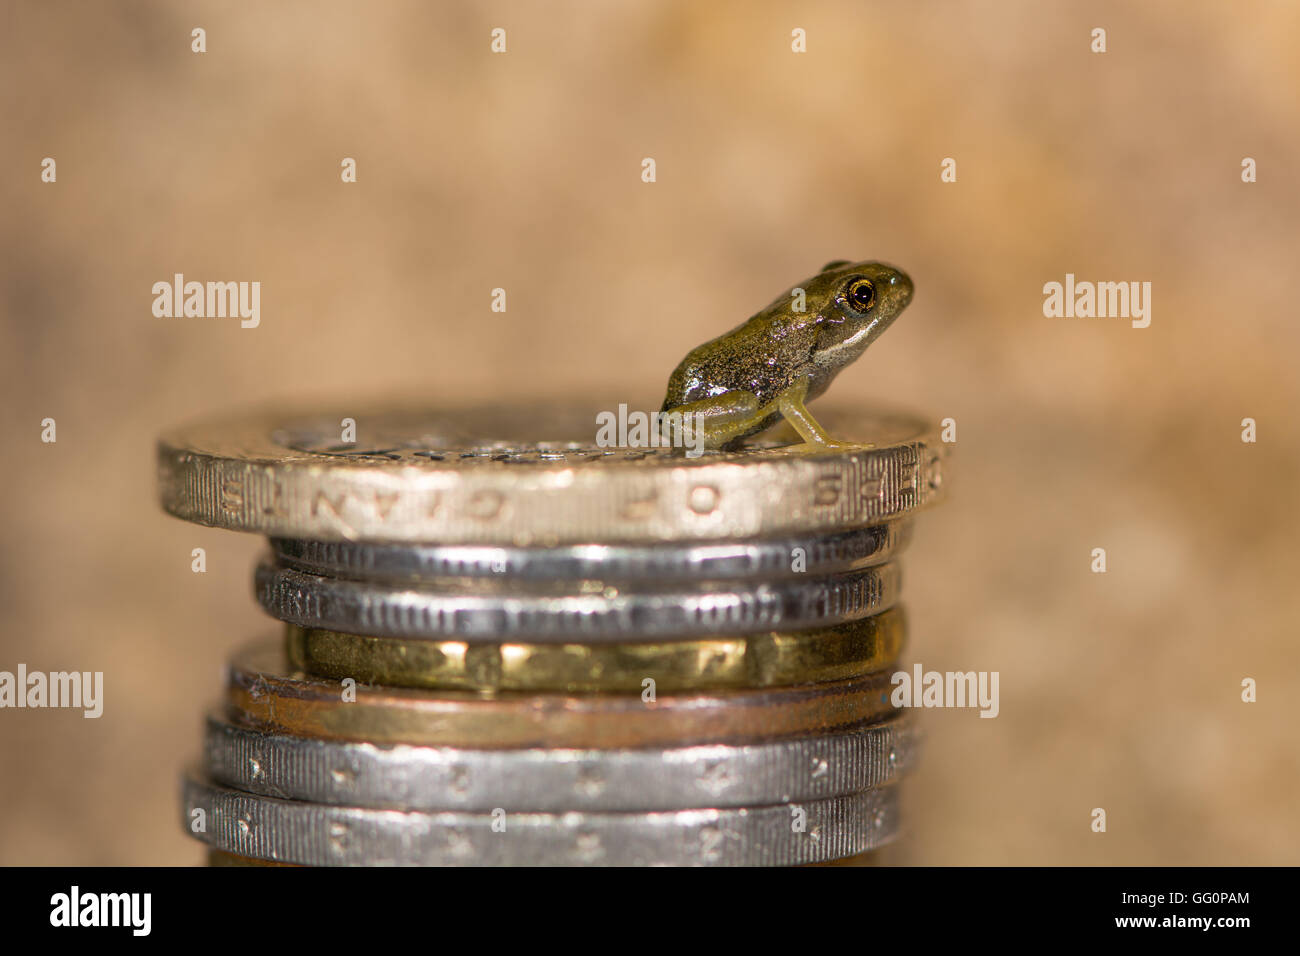 Common frog (Rana temporaria) froglet on stack of coins. Tiny baby frog with coins to show small size, approximately 8mm length Stock Photo